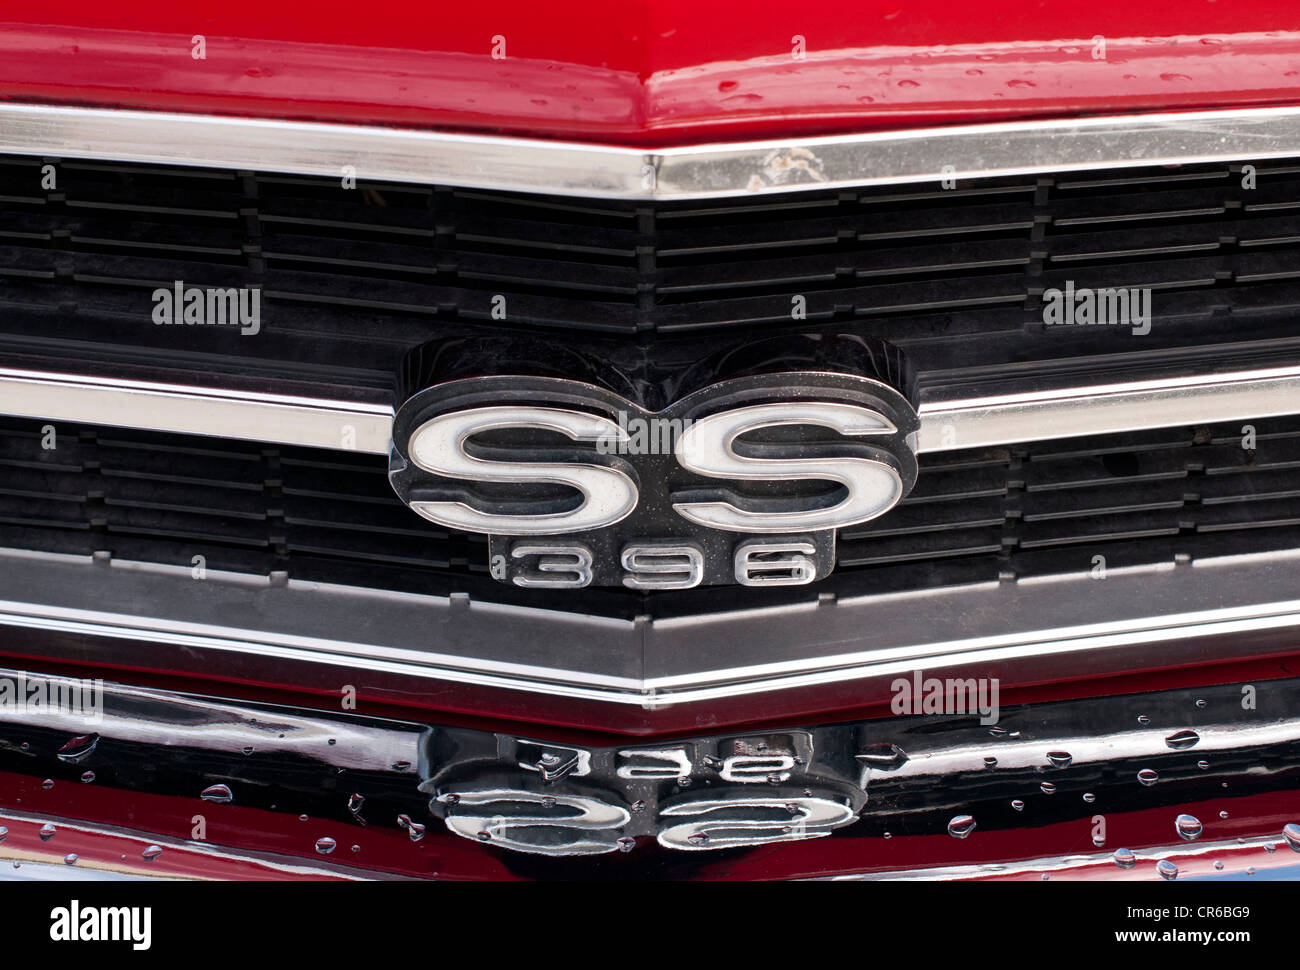 1969 Chevrolet el Camino SS 396 Ute Utility front grille Stock Photo